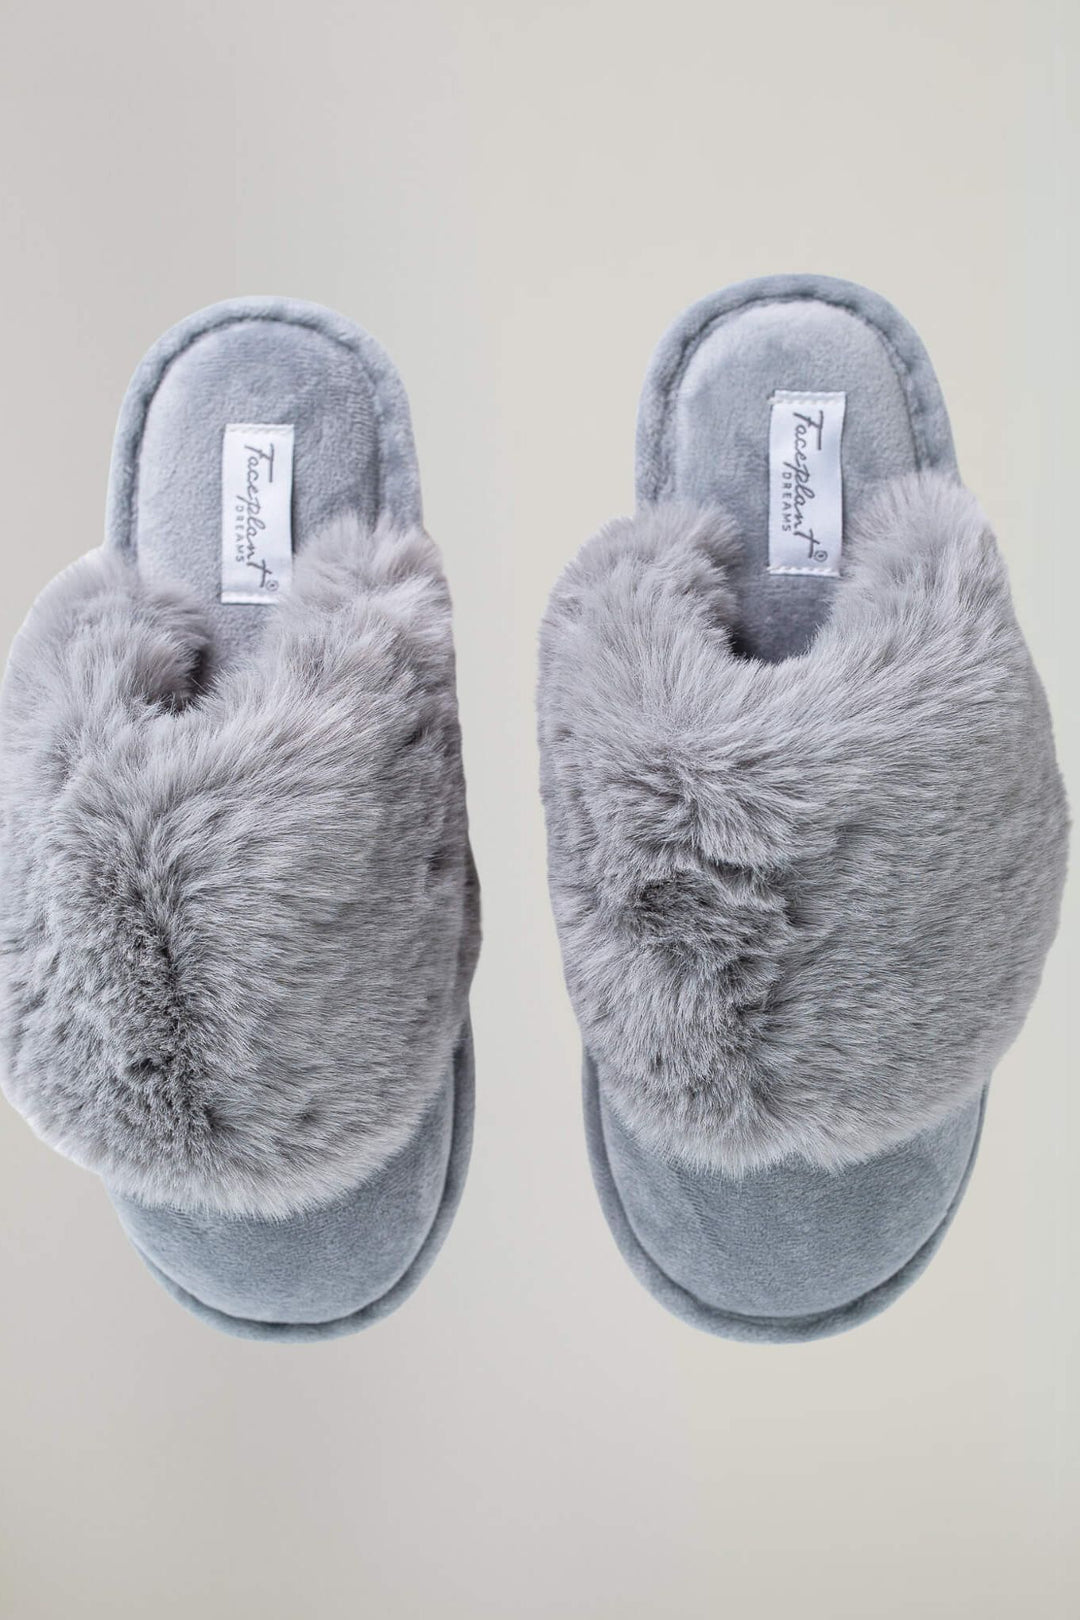 Furry Slippers – Faceplant Dreams